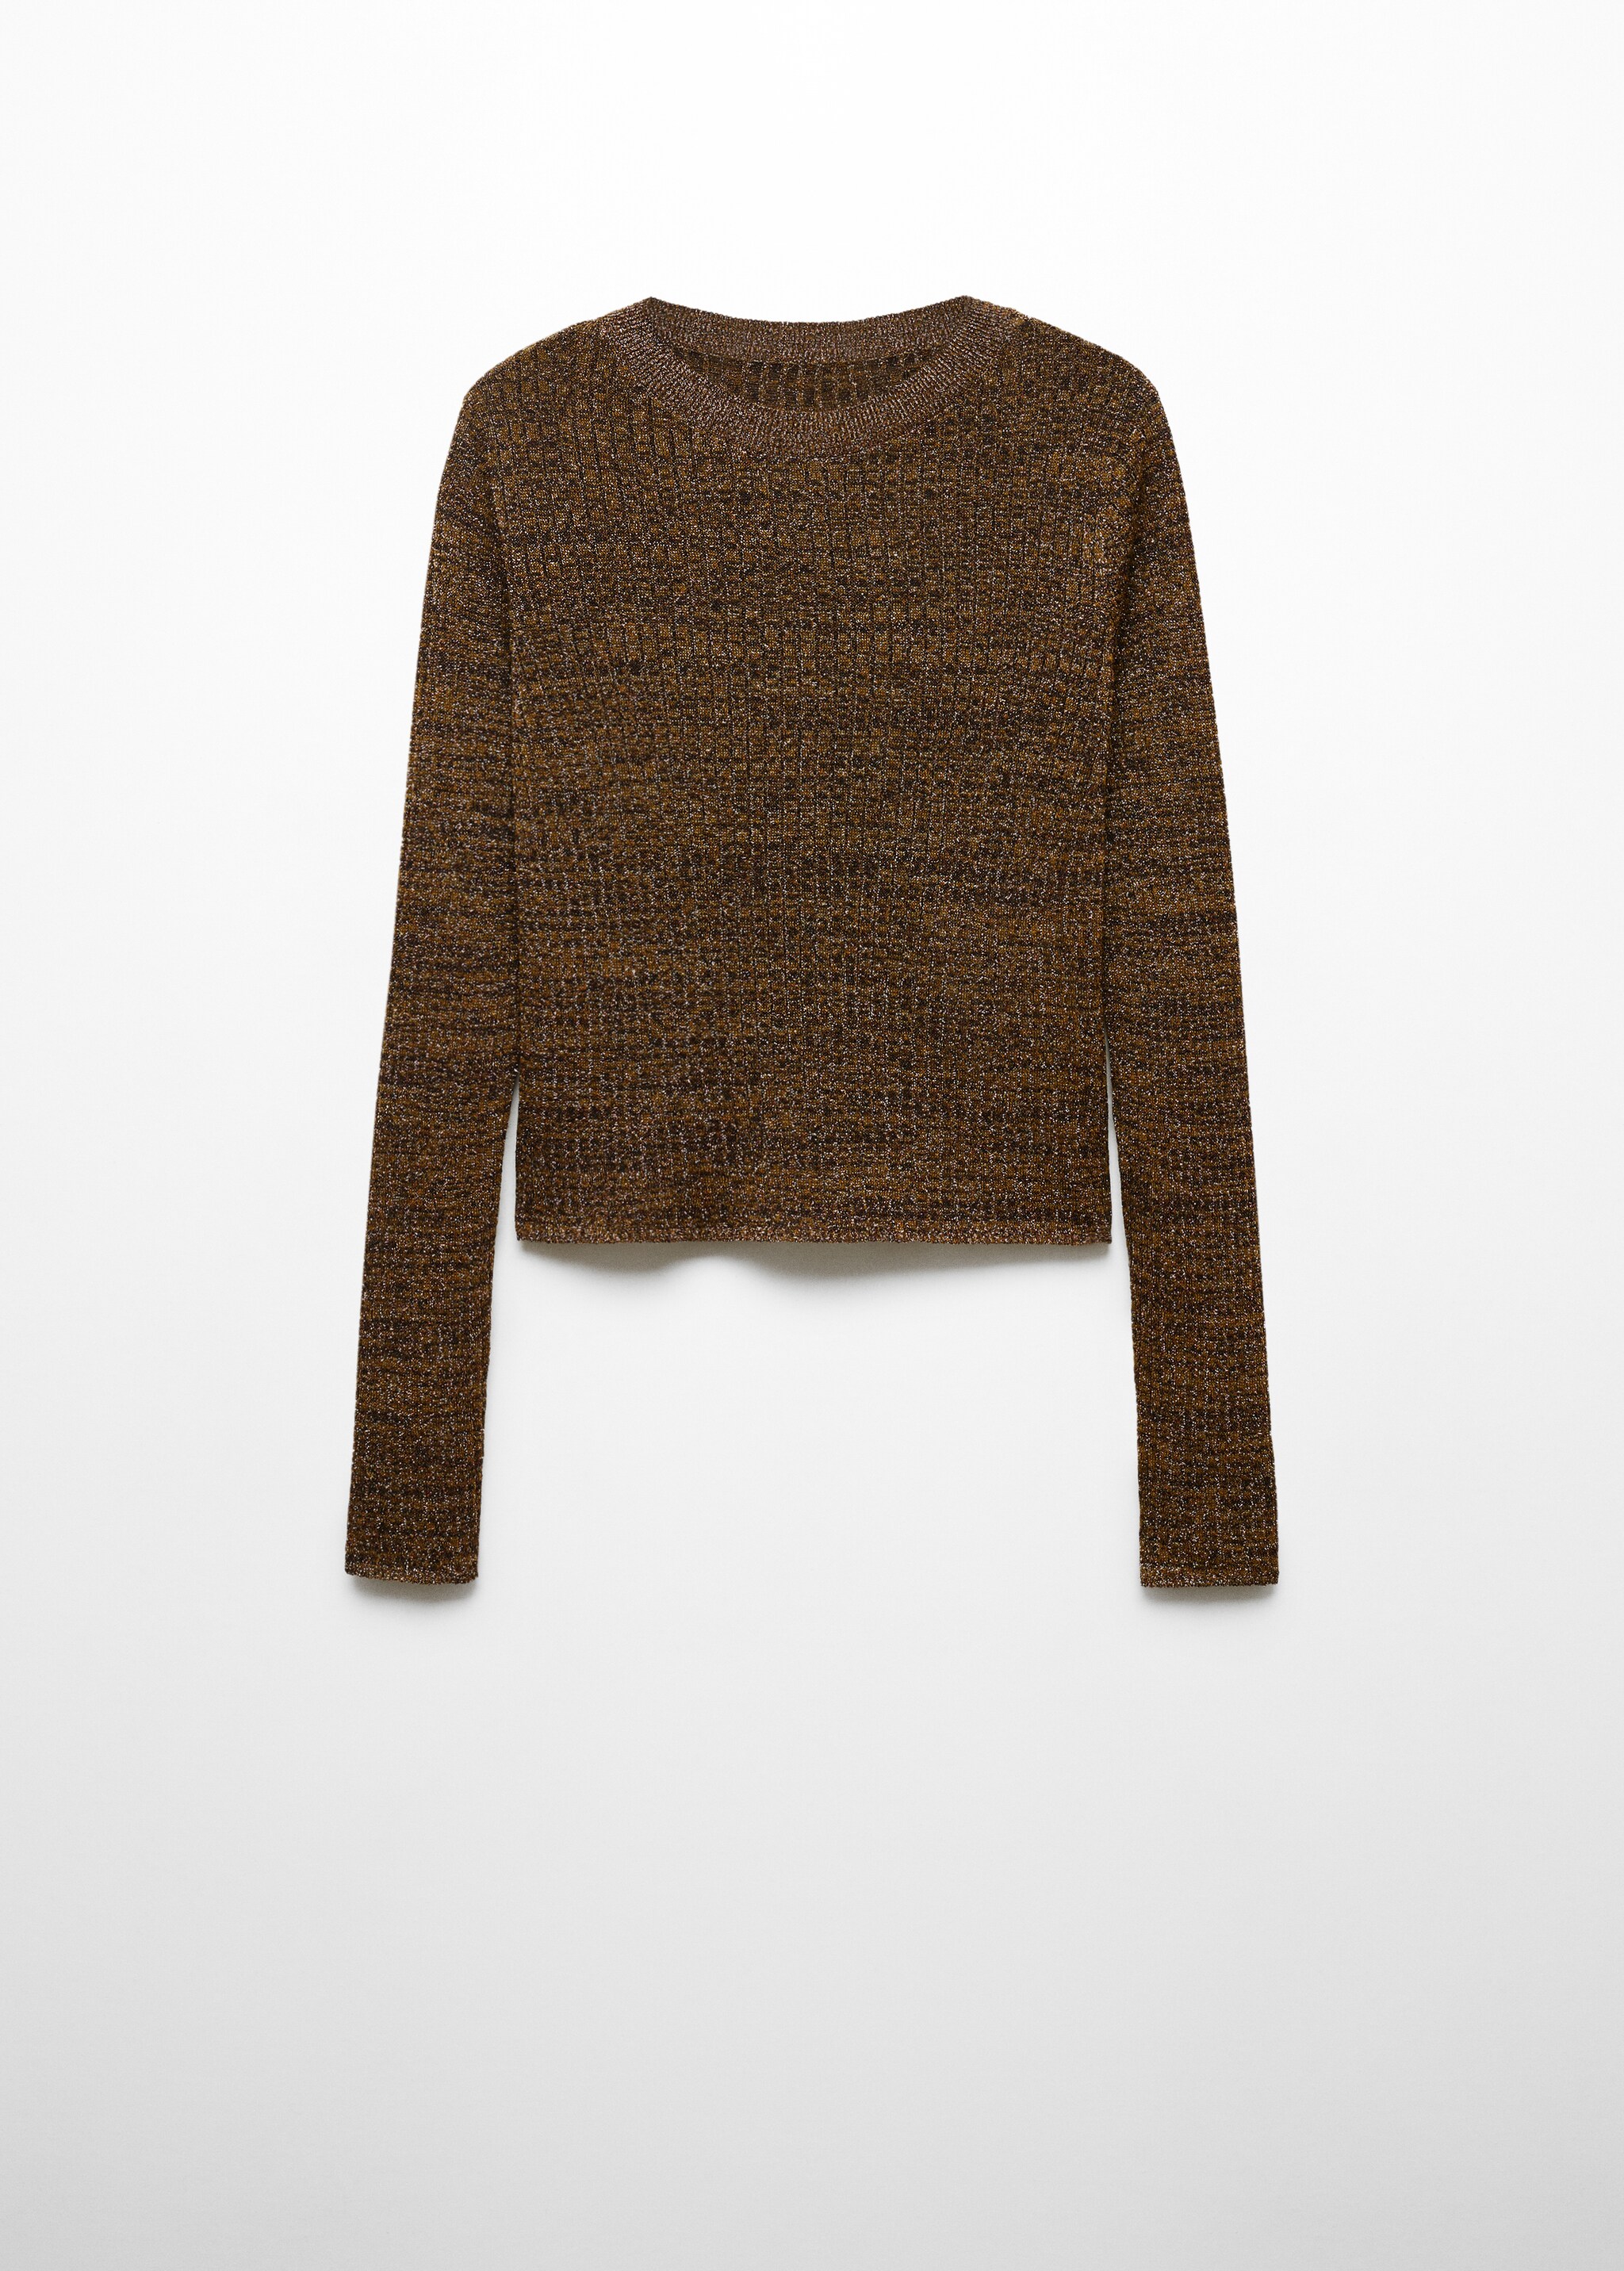 Crewneck lurex sweater - Article without model